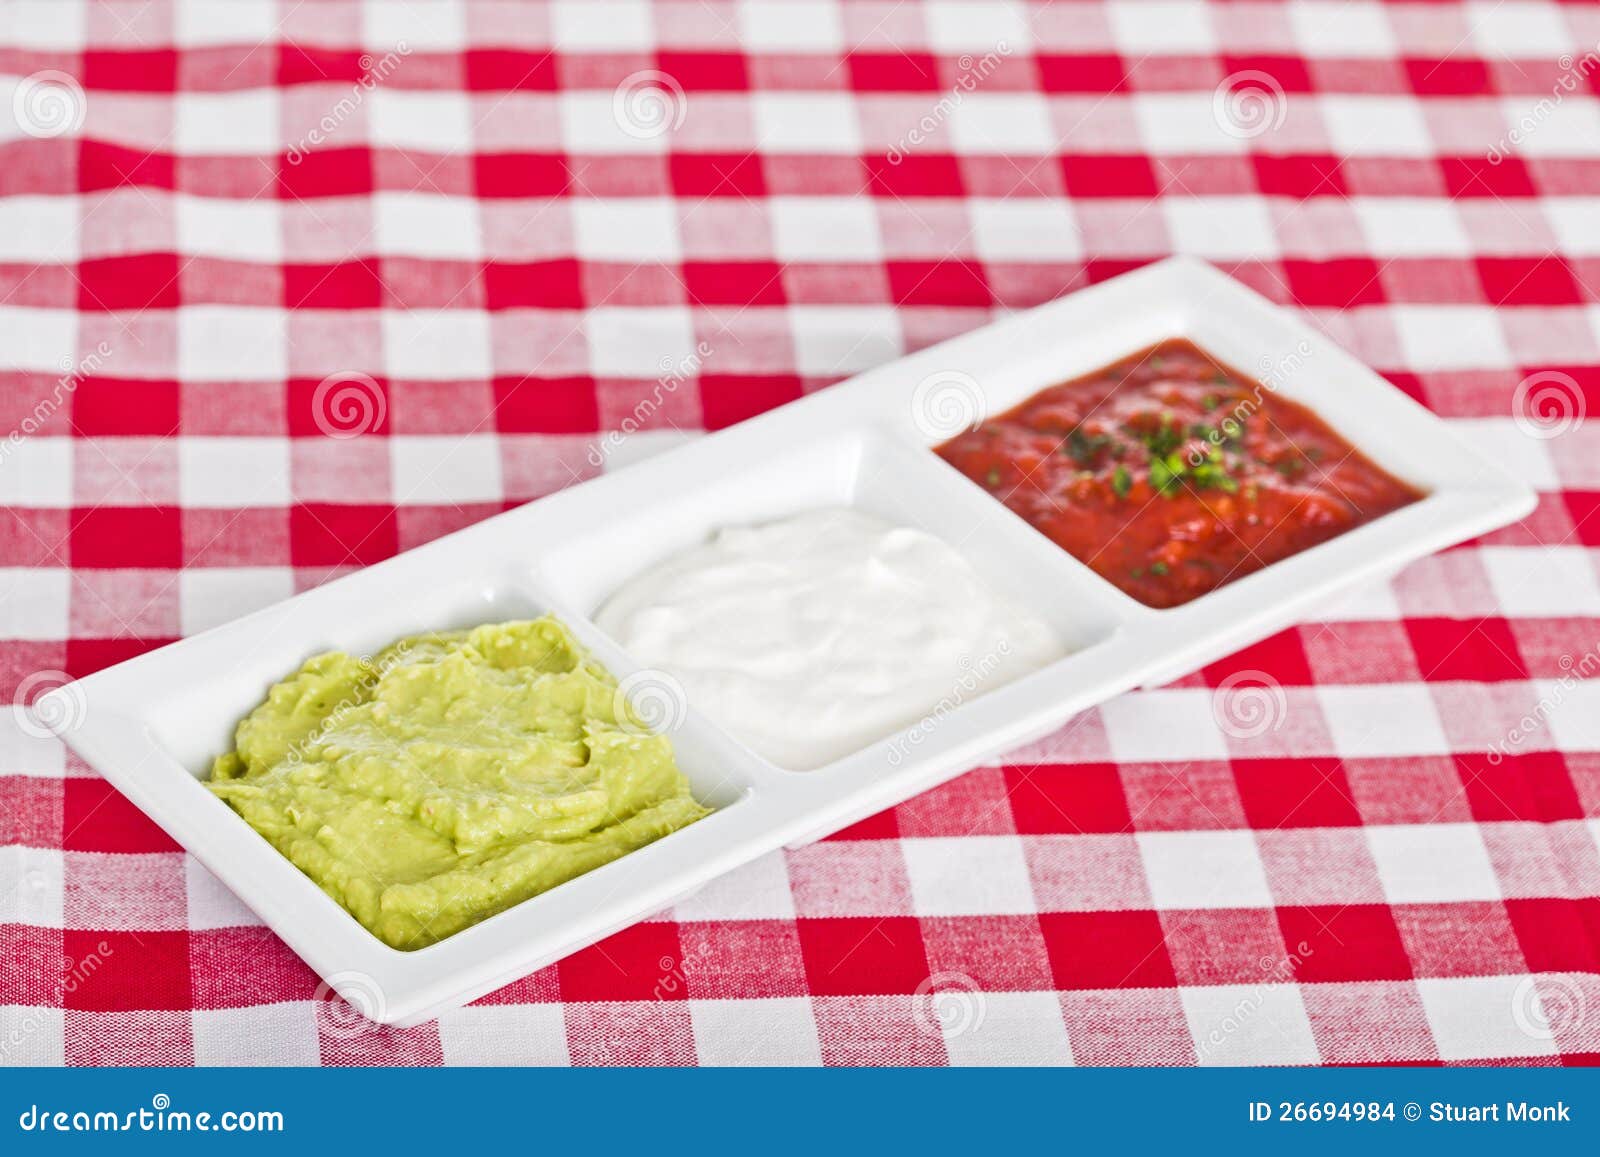 Three mexican dips stock photo. Image of dipping, chopped - 26694984